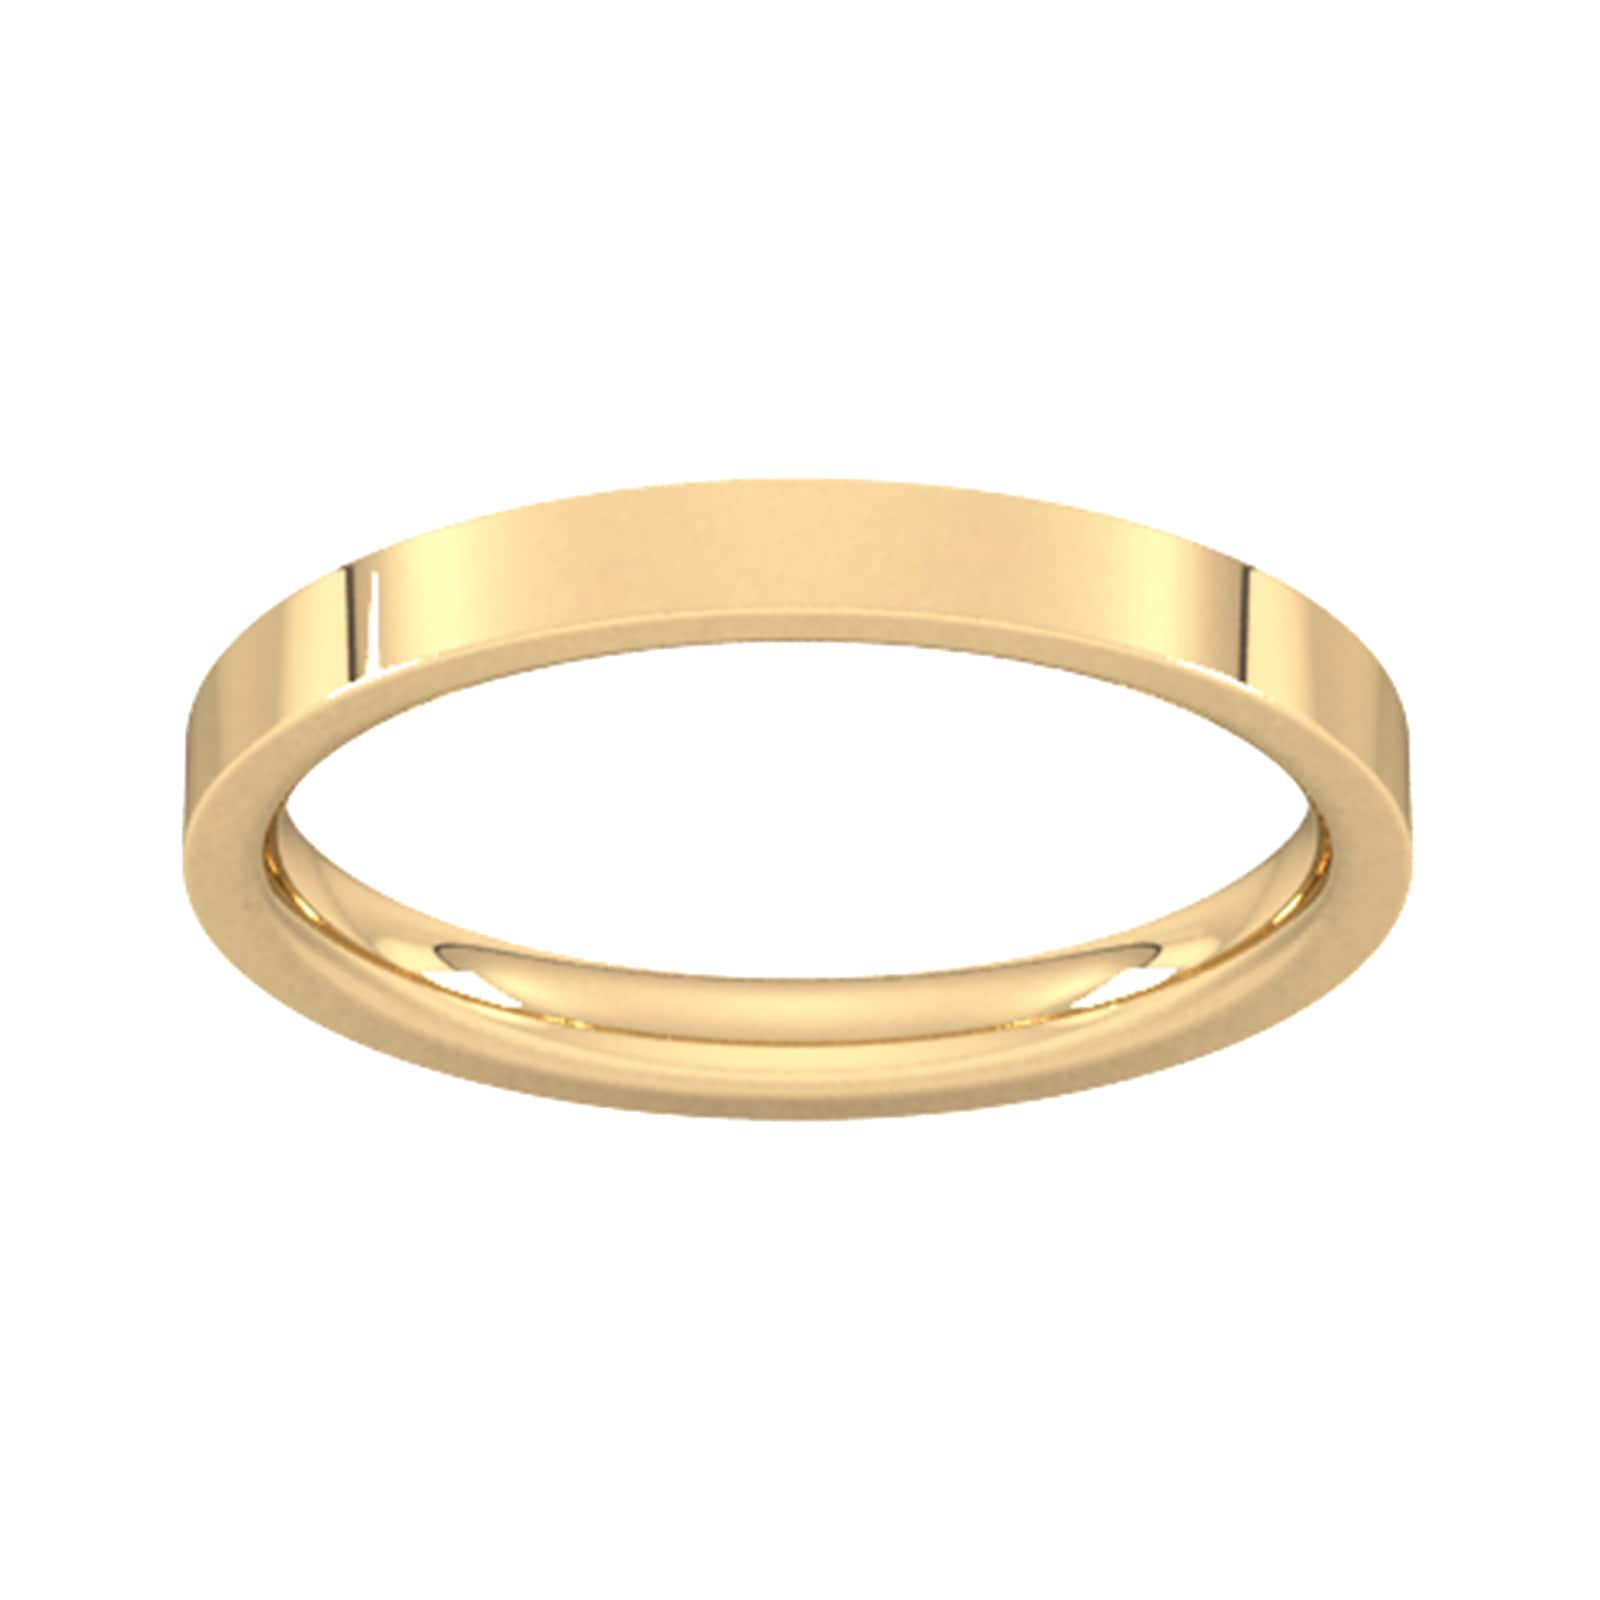 2.5mm Flat Court Heavy Wedding Ring In 18 Carat Yellow Gold - Ring Size M